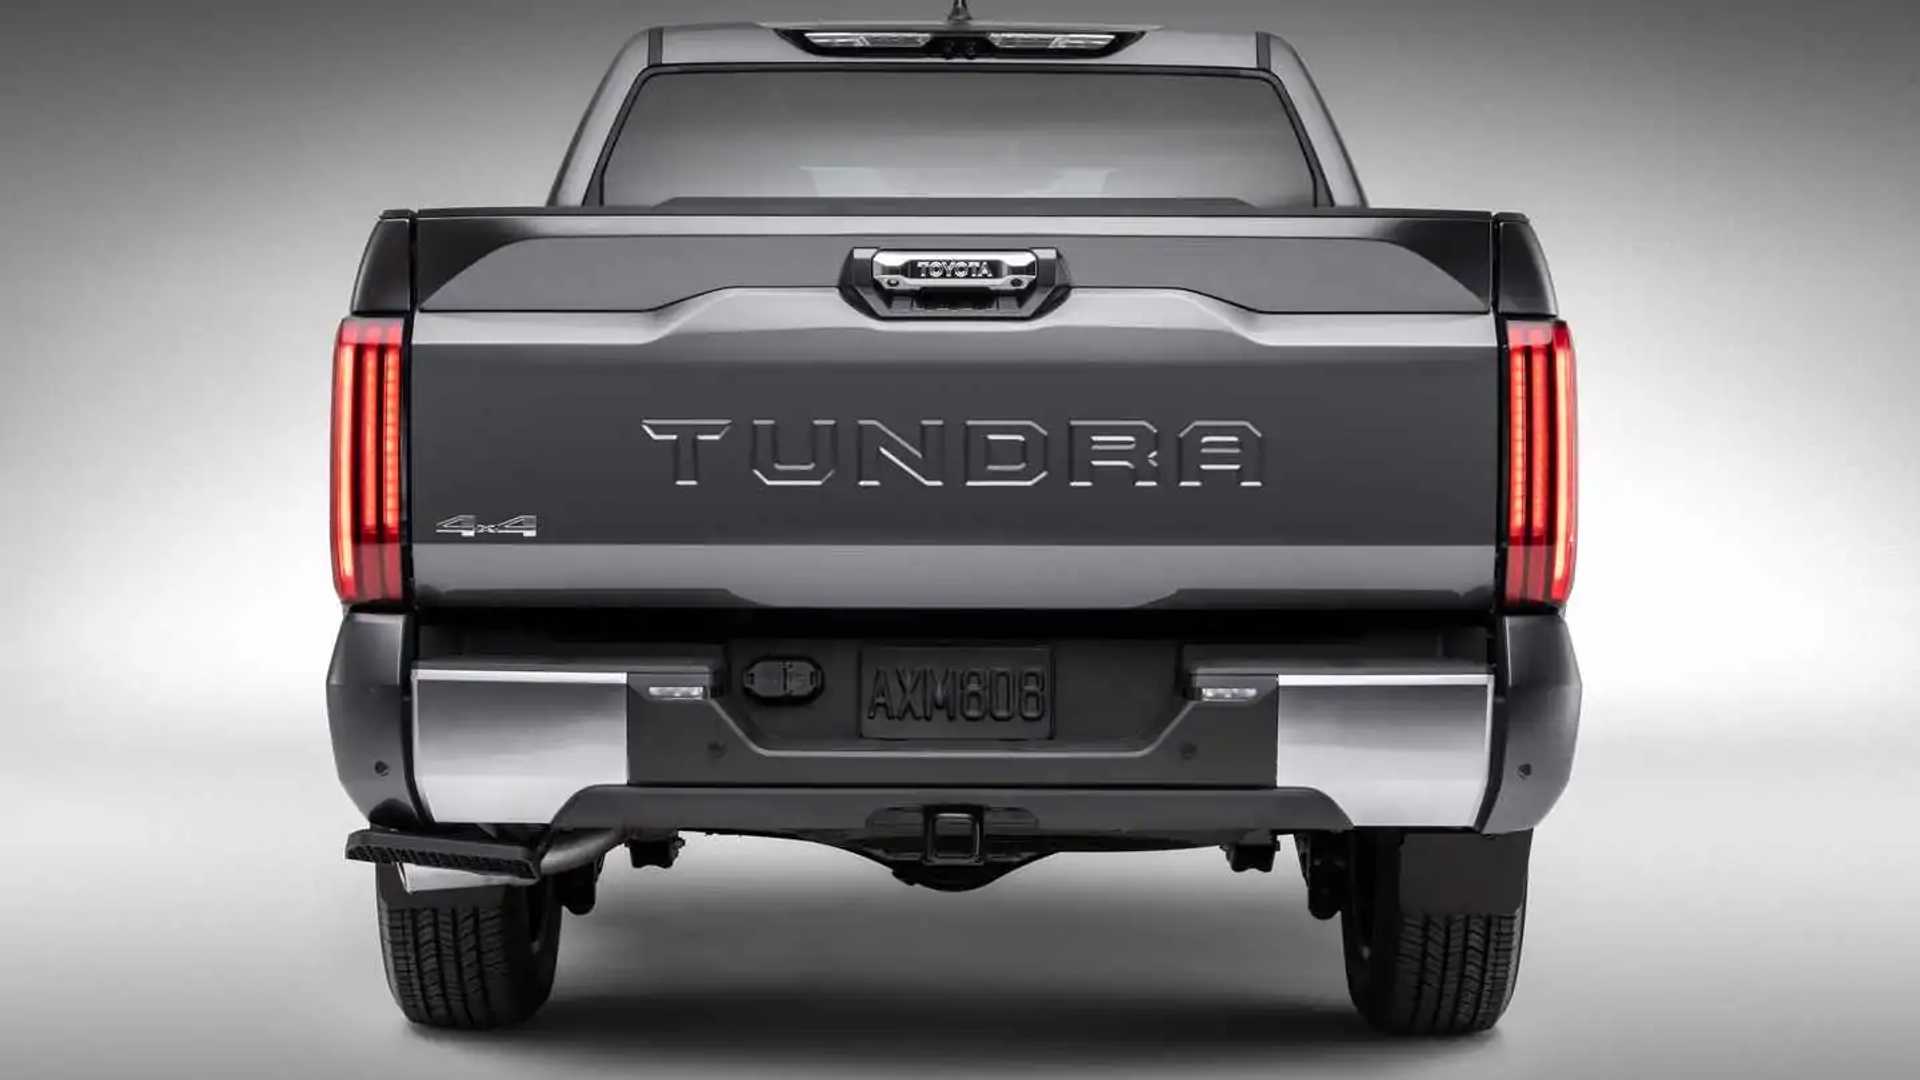 2022 Toyota Tundra Has Simple Tailgate Because Customers Want It